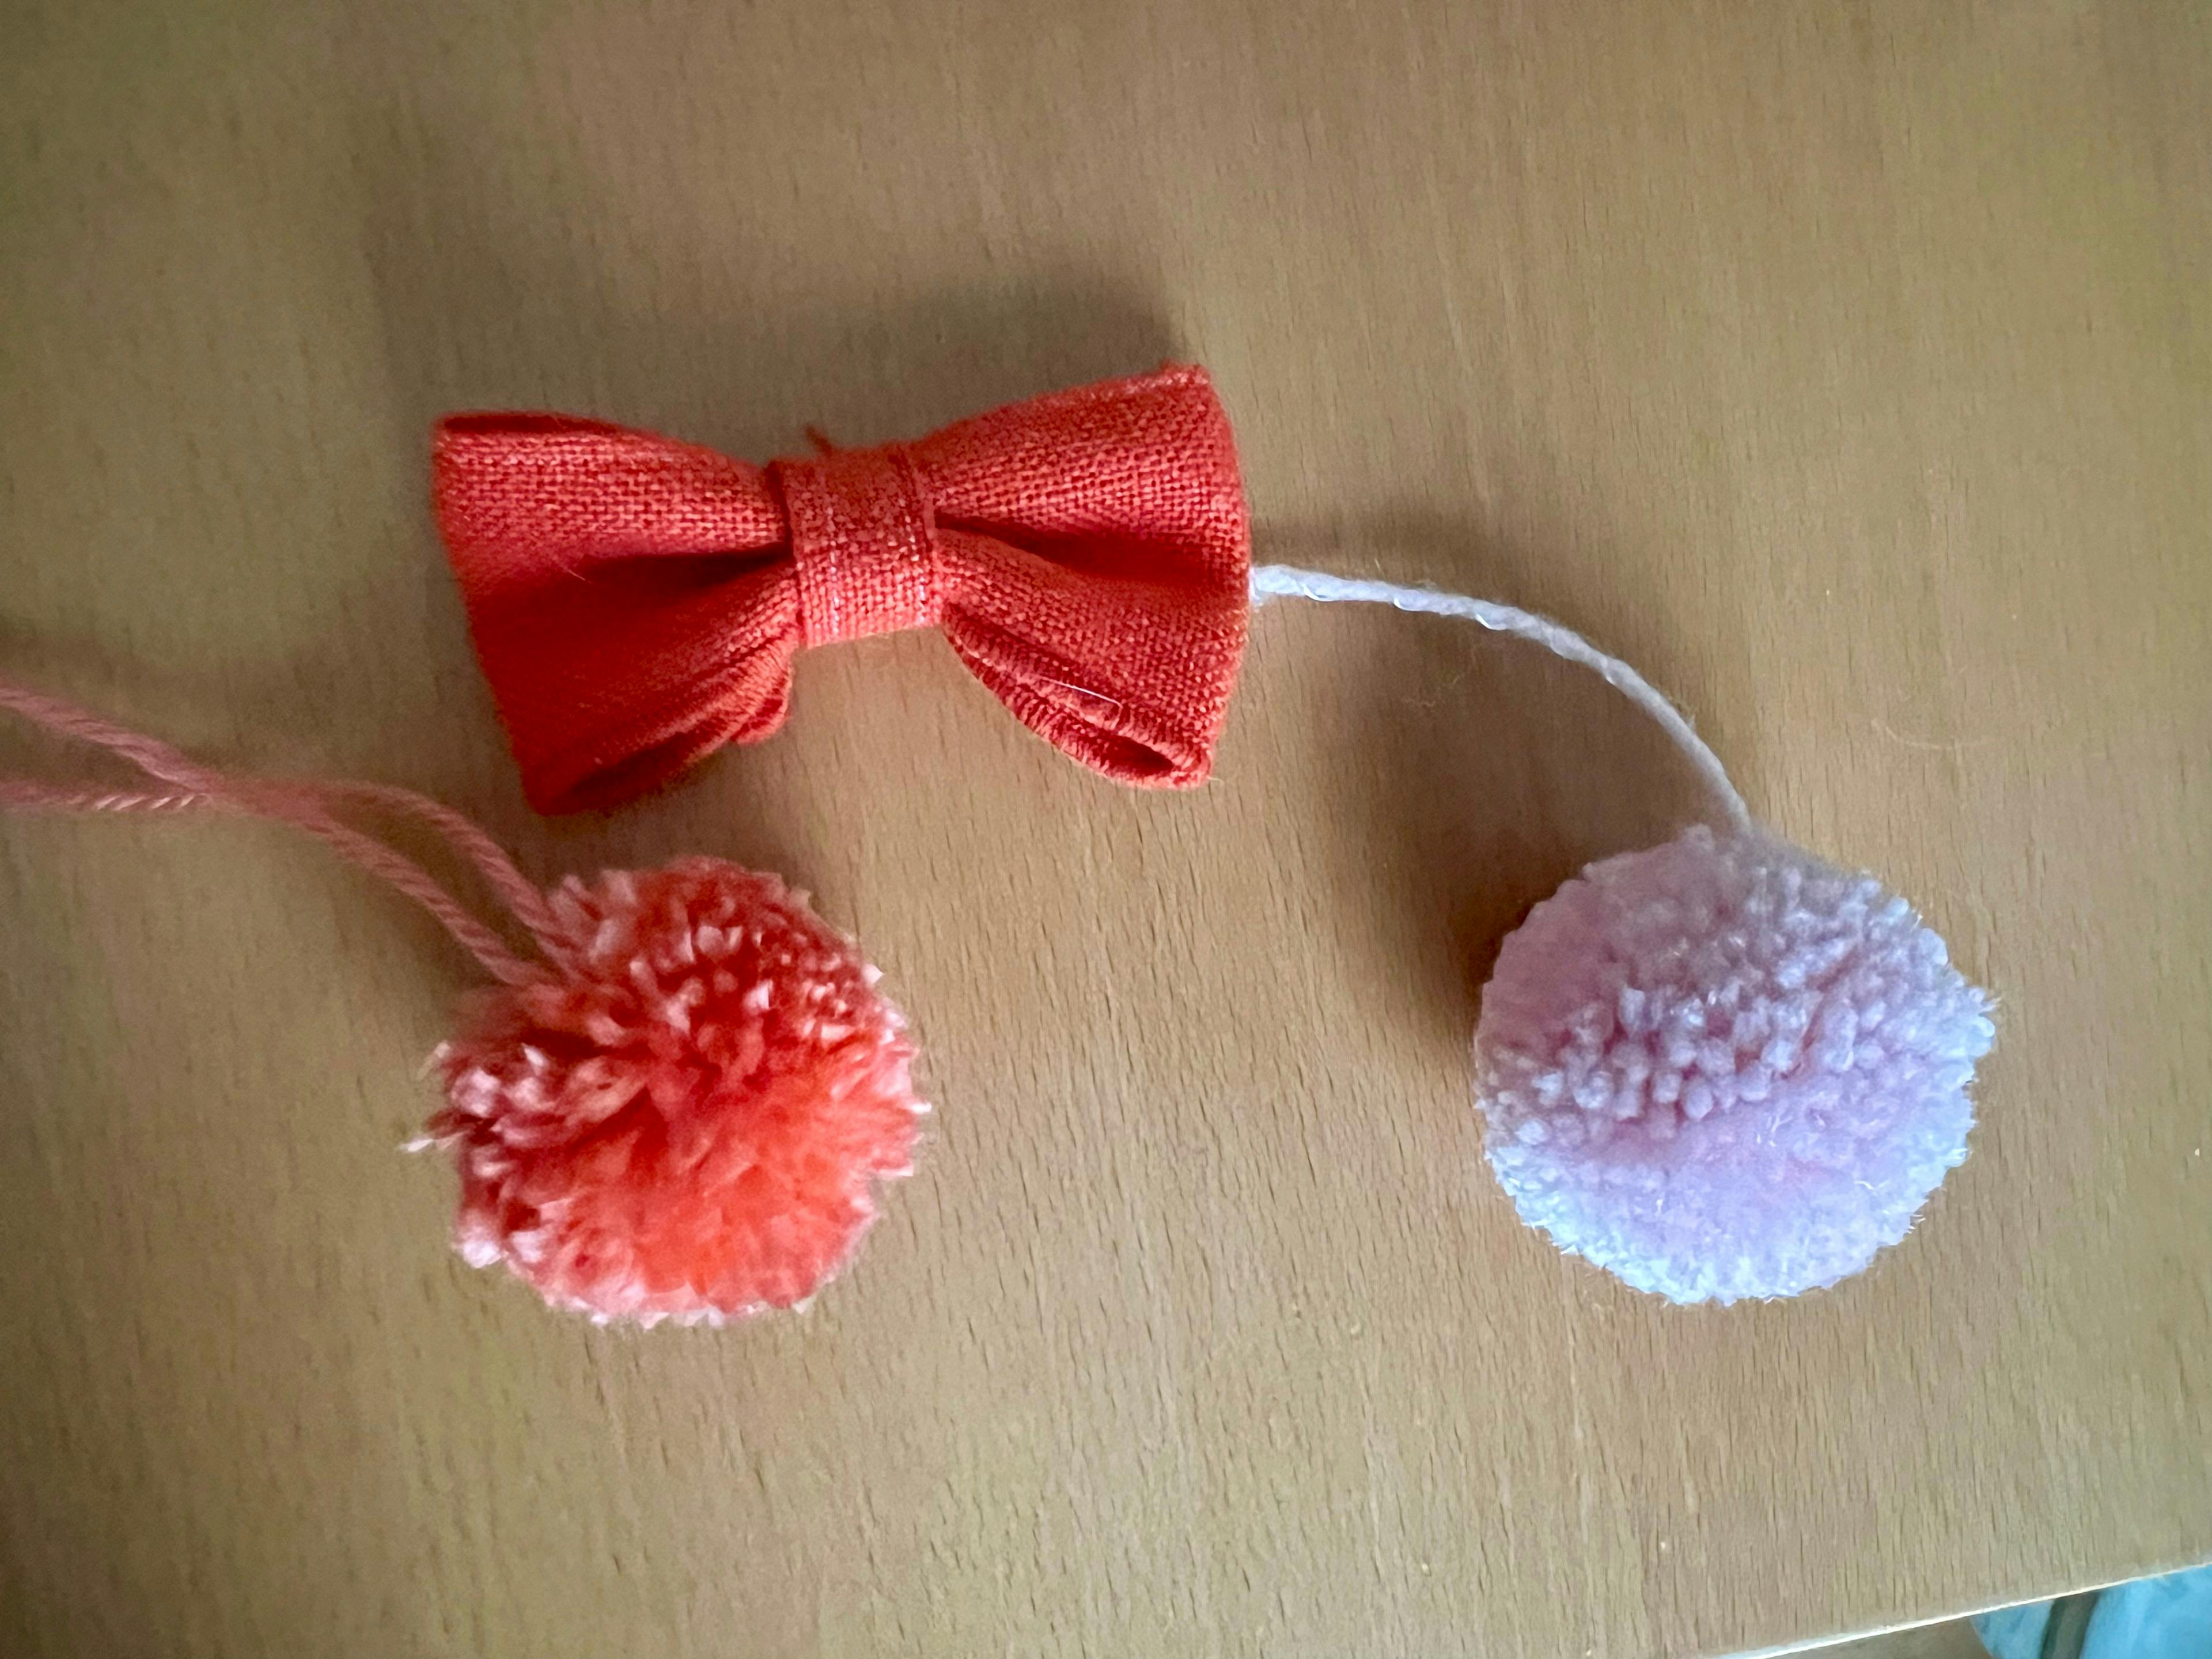 An orange fabric bow, and two pom poms made of yarn - one orange and one light pink